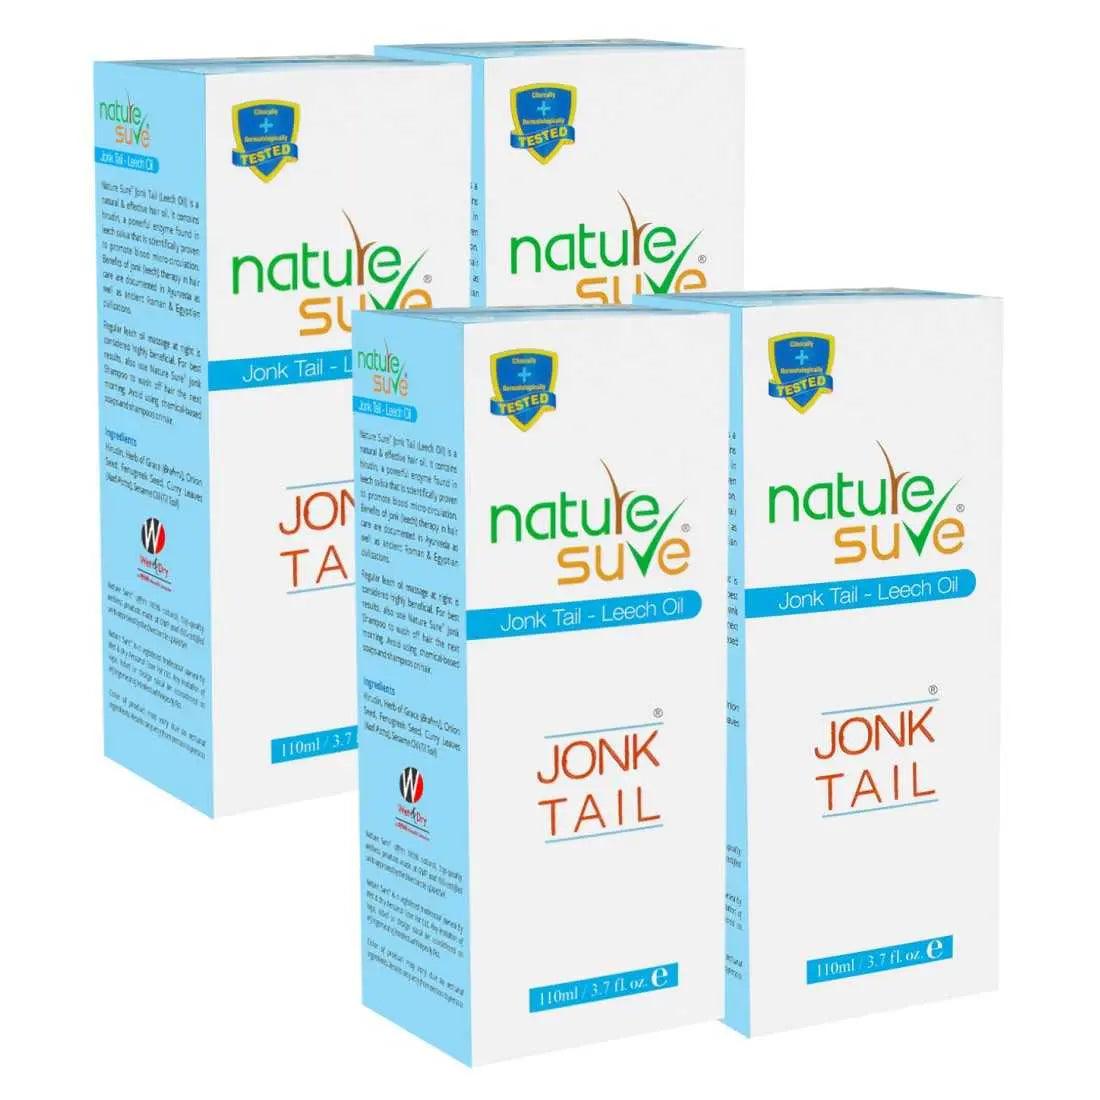 Nature Sure Jonk Tail for Hair Problems in Men and Women - 110ml 8903540010015